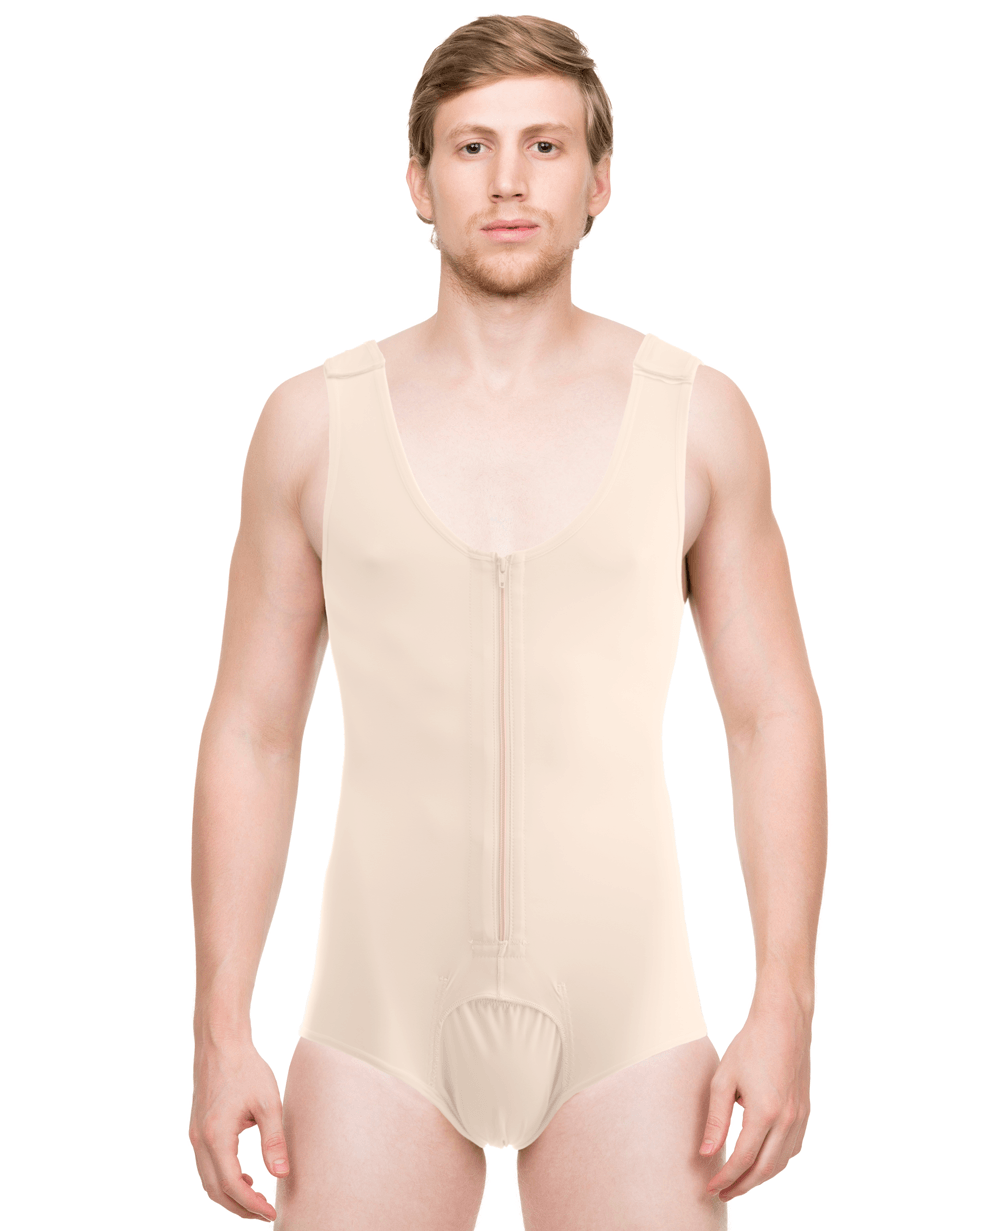 Isavela Post-Surgical Compression Garment is our recommended #faja